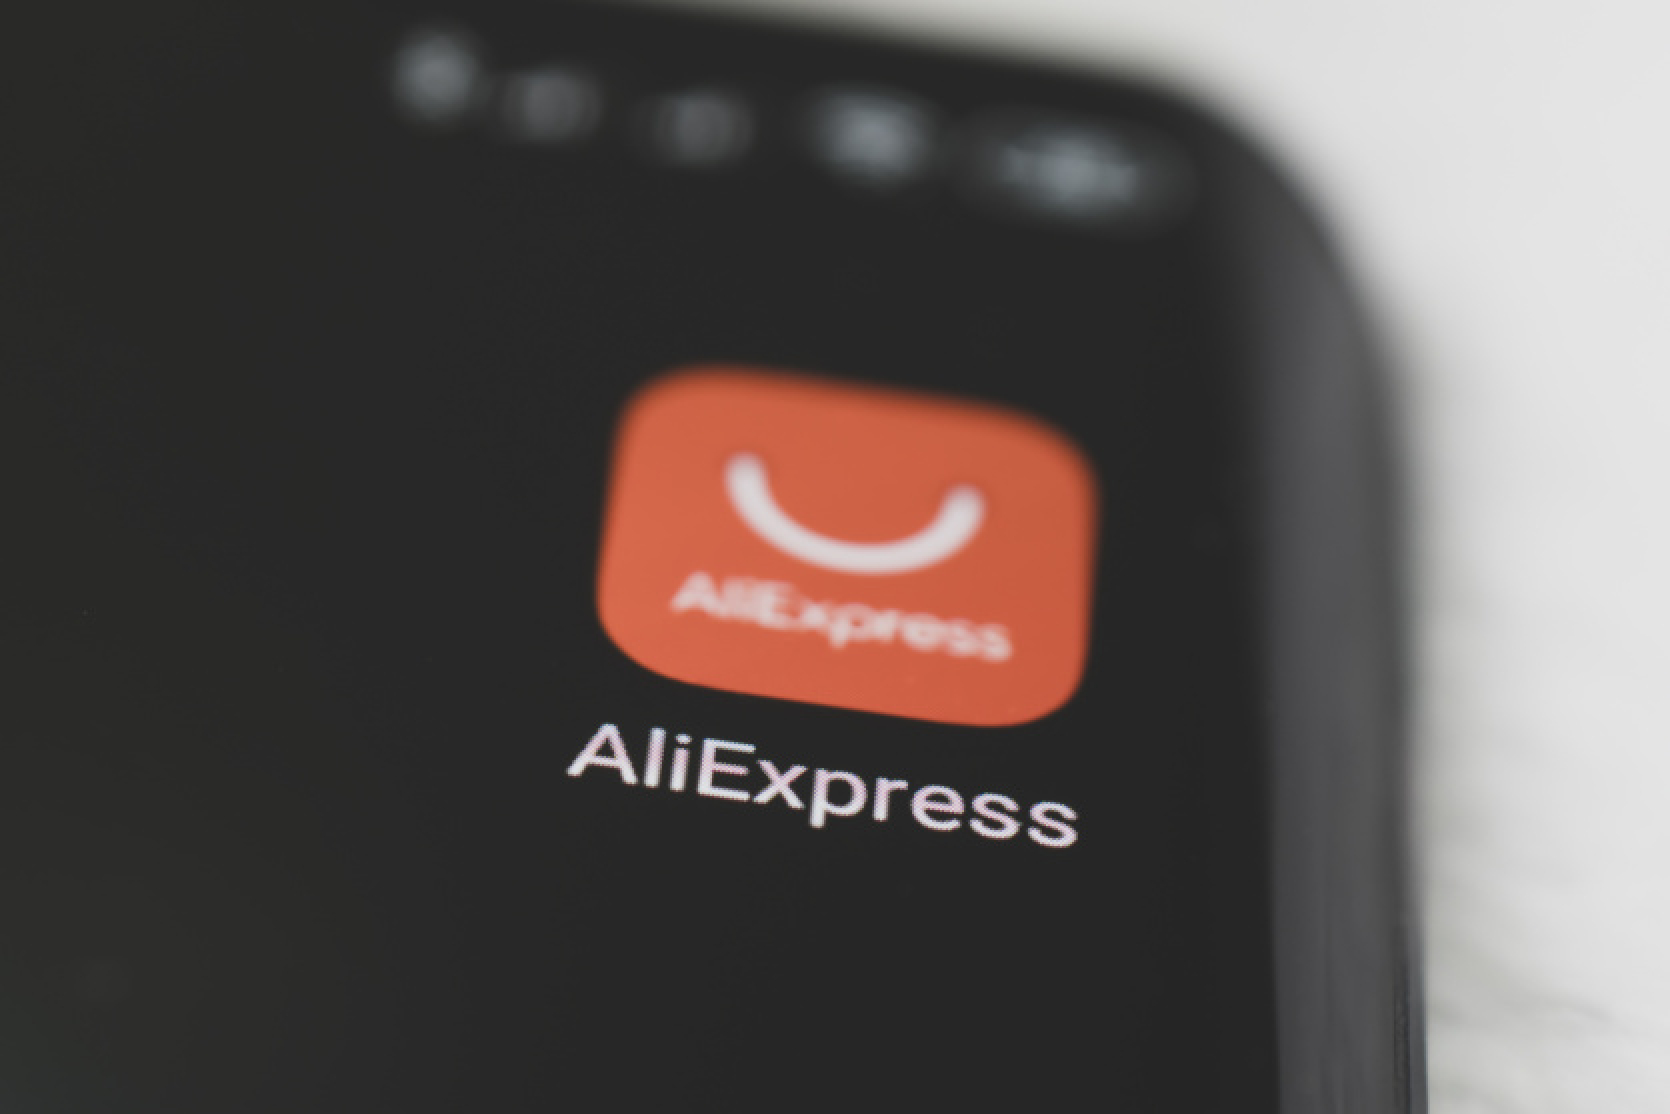 EU takes on AliExpress - site accused of distributing porn and other illegal content